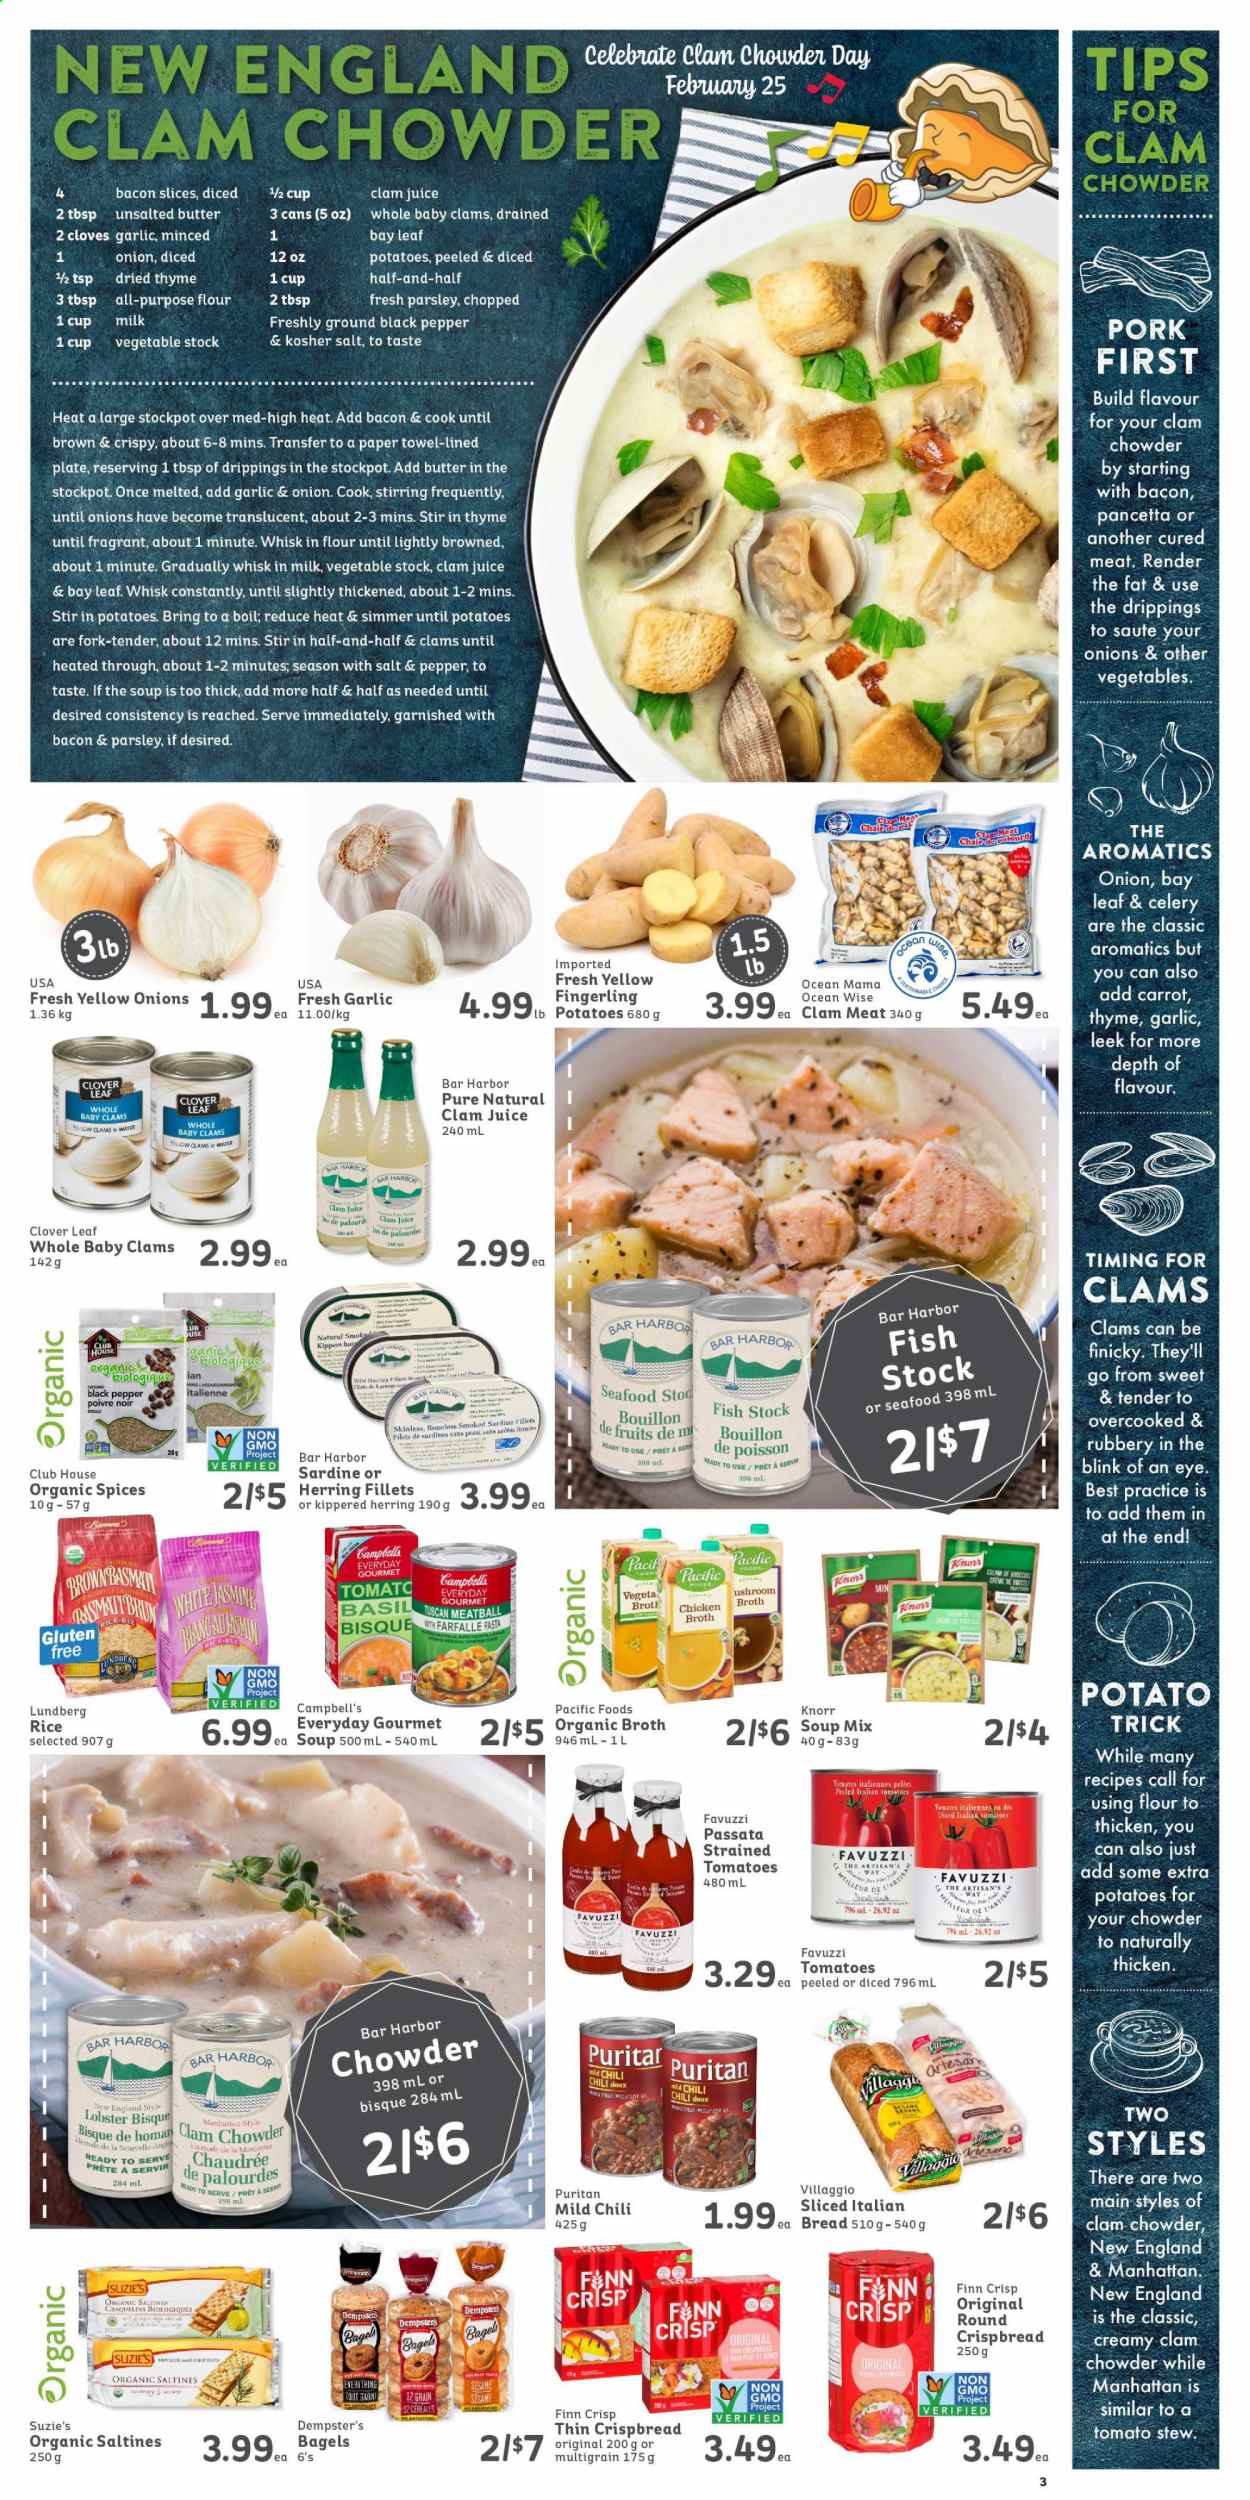 thumbnail - IGA Simple Goodness Flyer - February 19, 2021 - February 25, 2021 - Sales products - bagels, bread, crispbread, celery, leek, tomatoes, parsley, lobster, herring, seafood, fish, Campbell's, fish stock, vegetable stock, soup mix, soup, pasta, Clover, milk, saltines, bouillon, flour, chicken broth, broth, clam chowder, esponja, cloves, stockpot, juice, Half and half, Knorr, pancetta. Page 3.